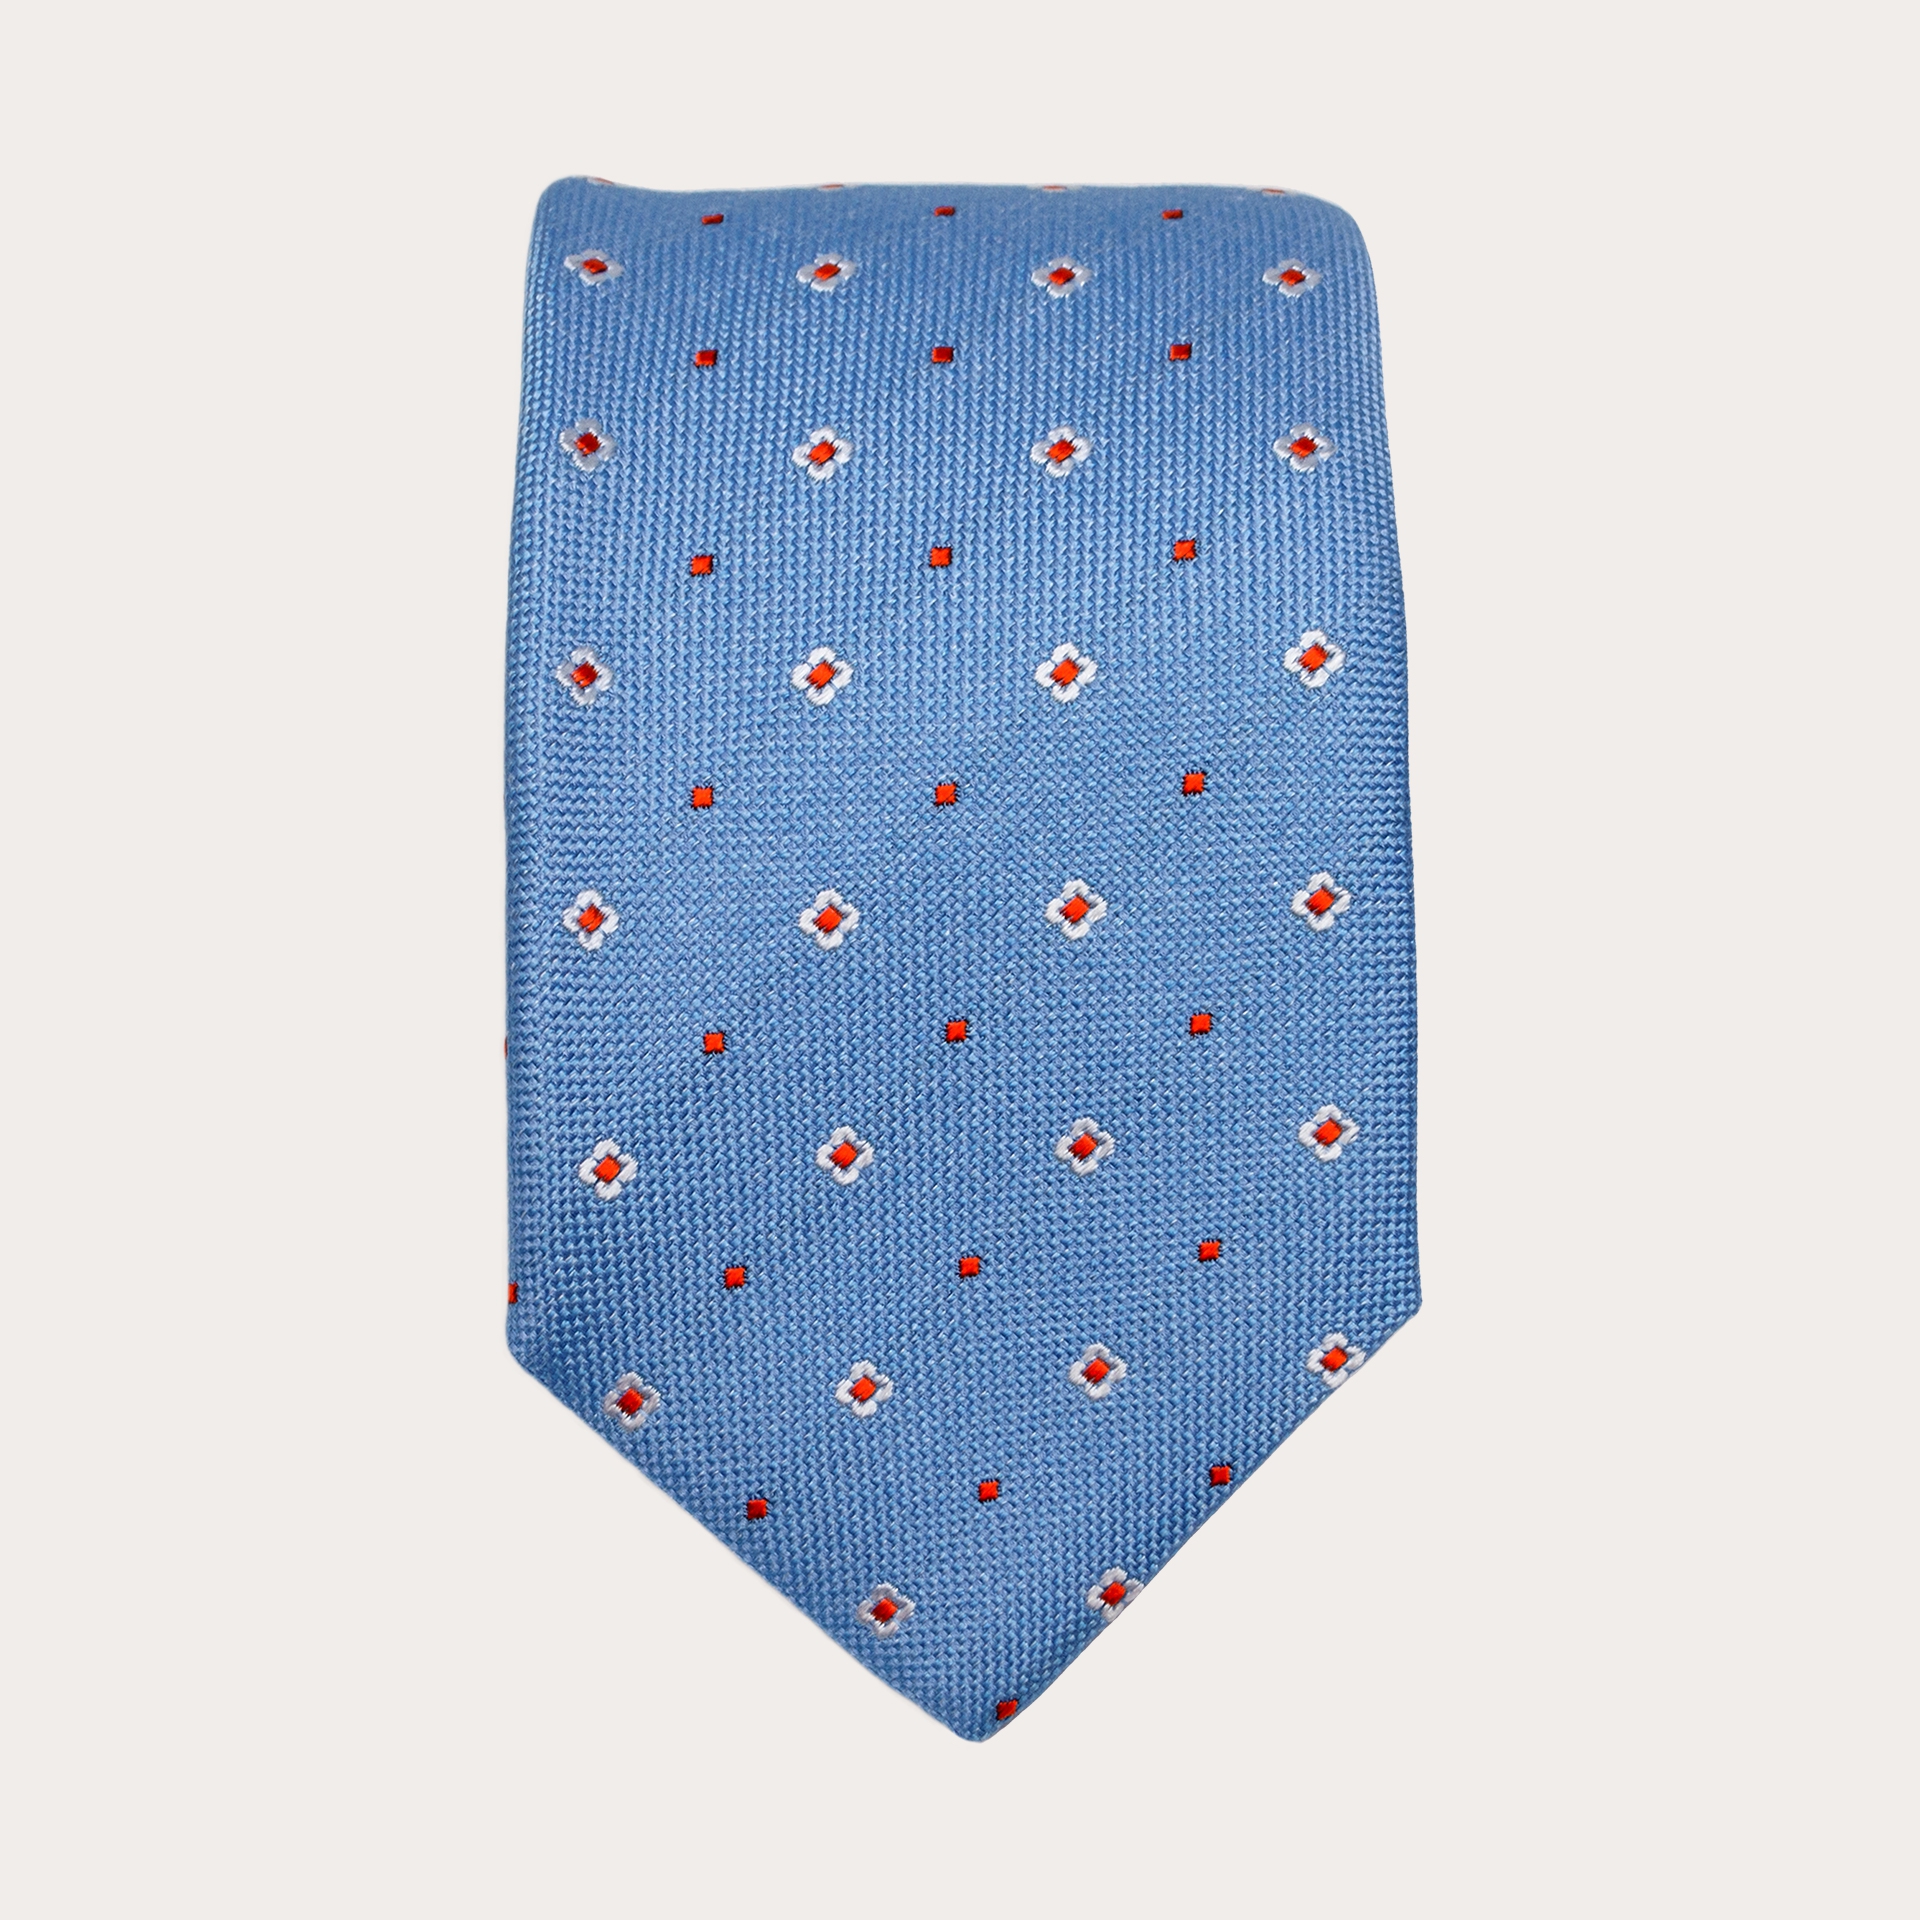 BRUCLE silk necktie in light blue with floral pattern